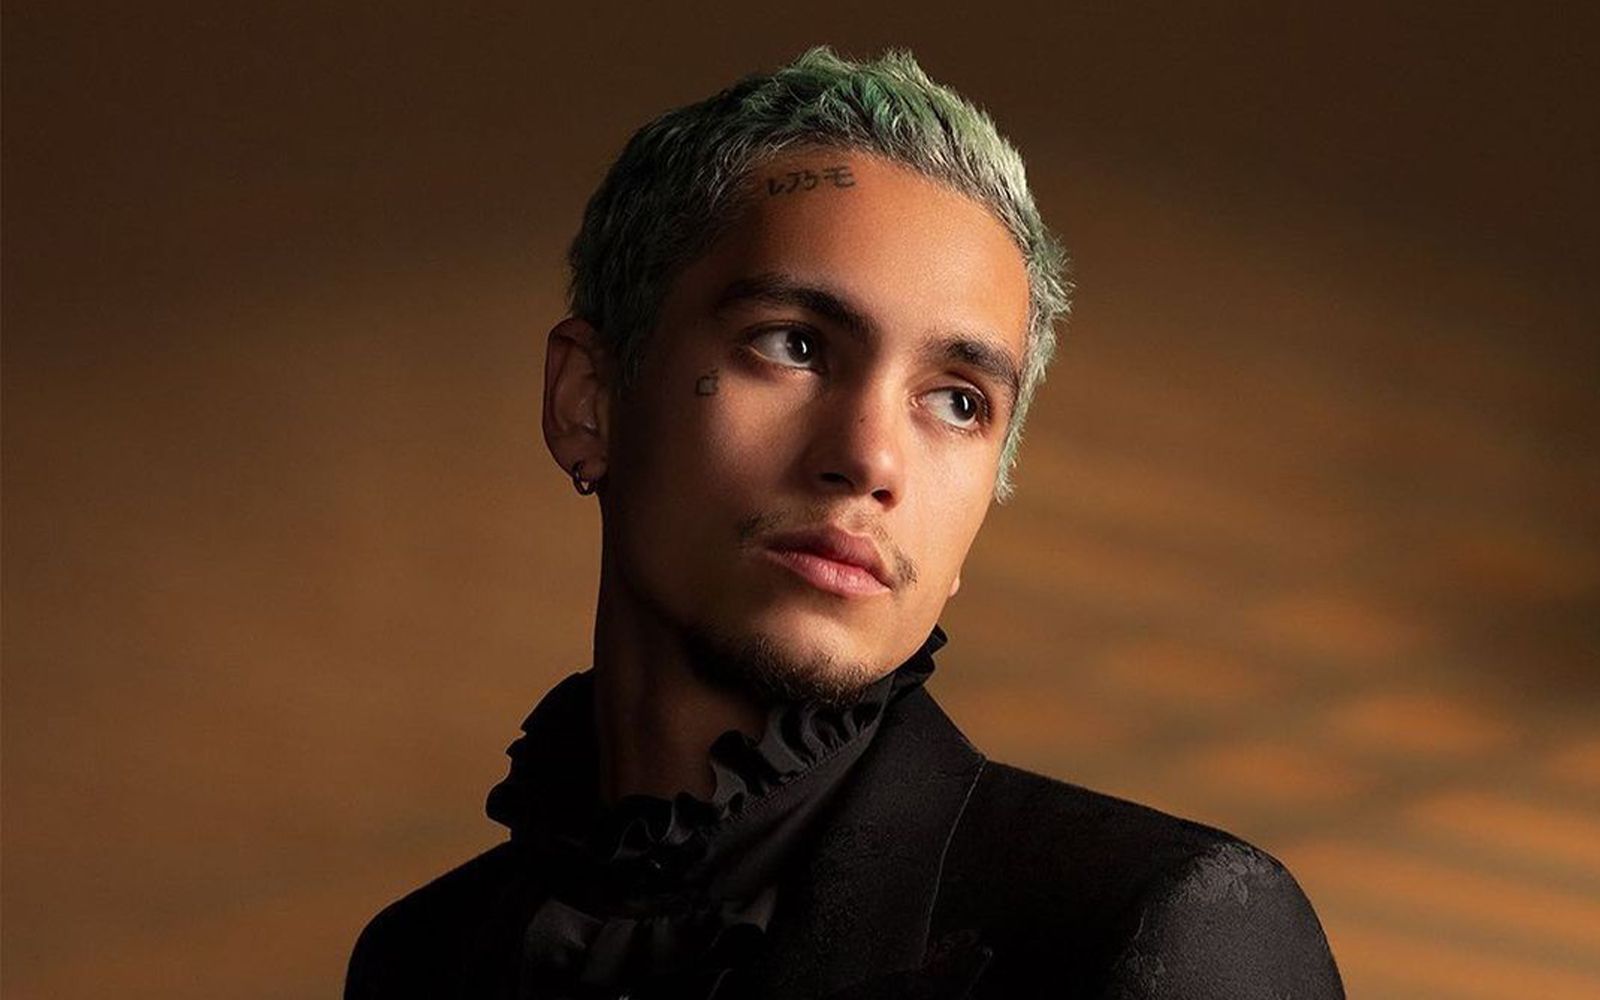 Dominic Fike's Blue Hair Inspires Fans to Try the Trend Themselves - wide 9